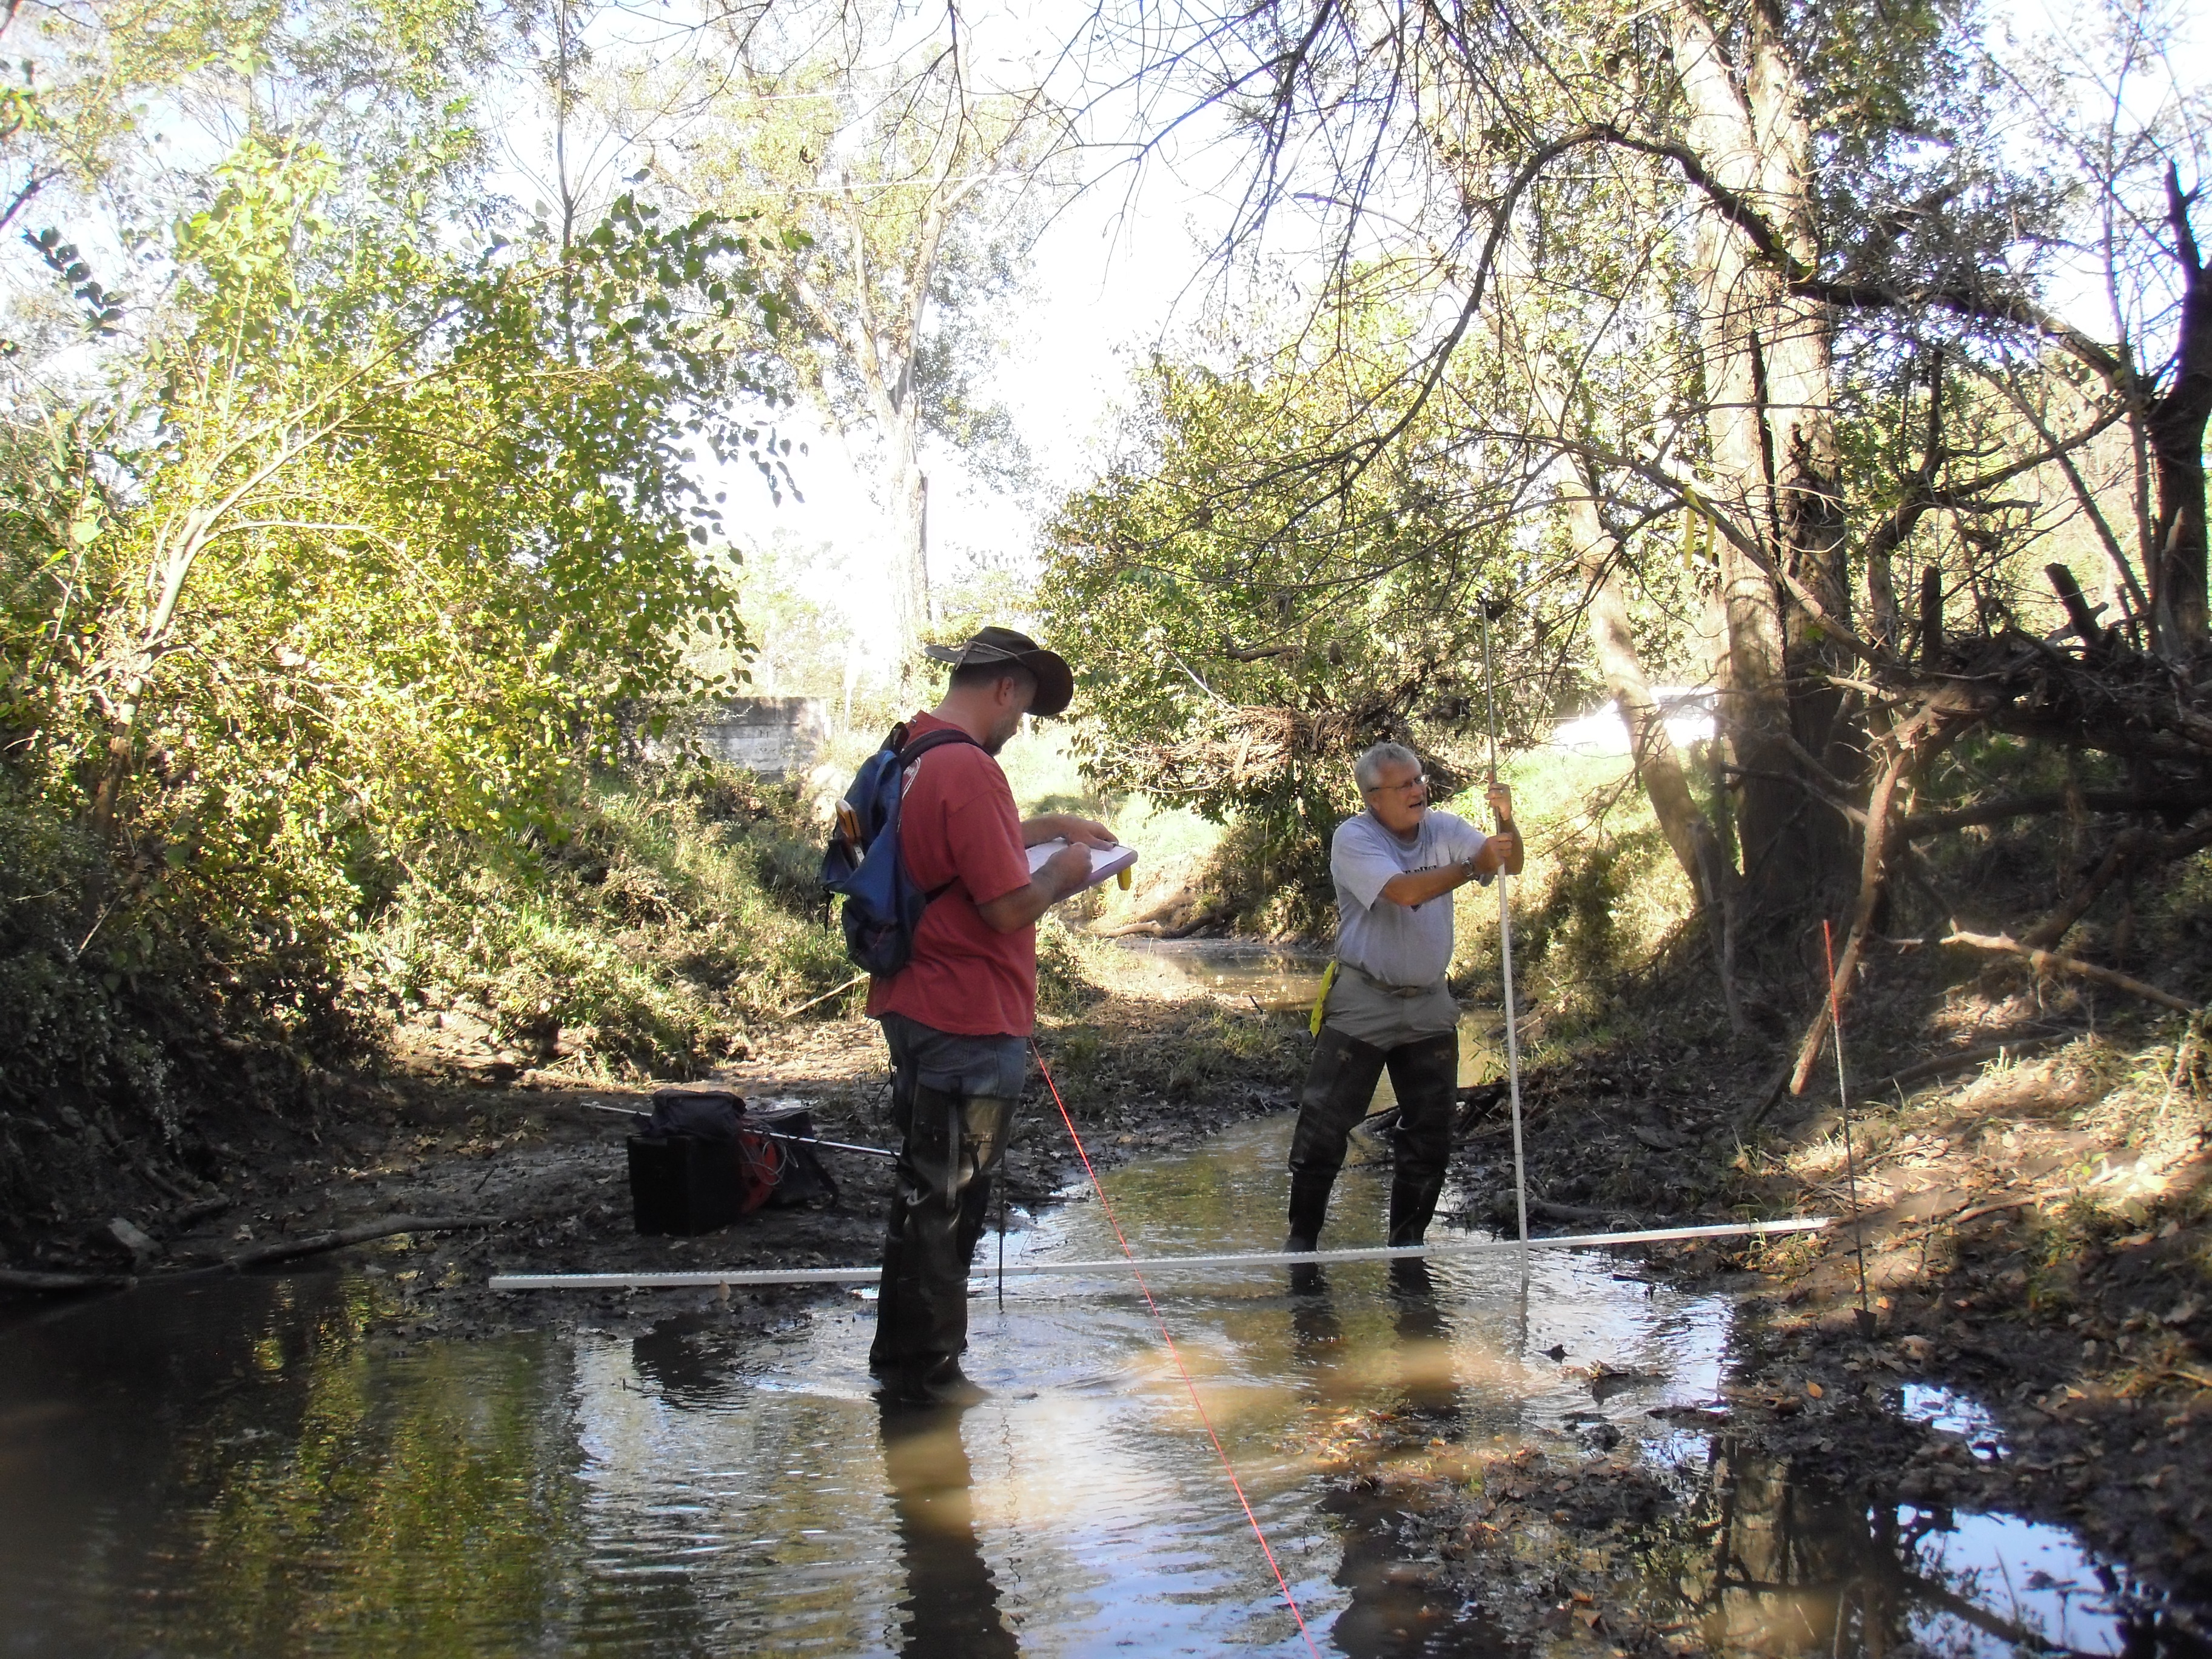 Taking measurements on Clear Creek, October 2010.